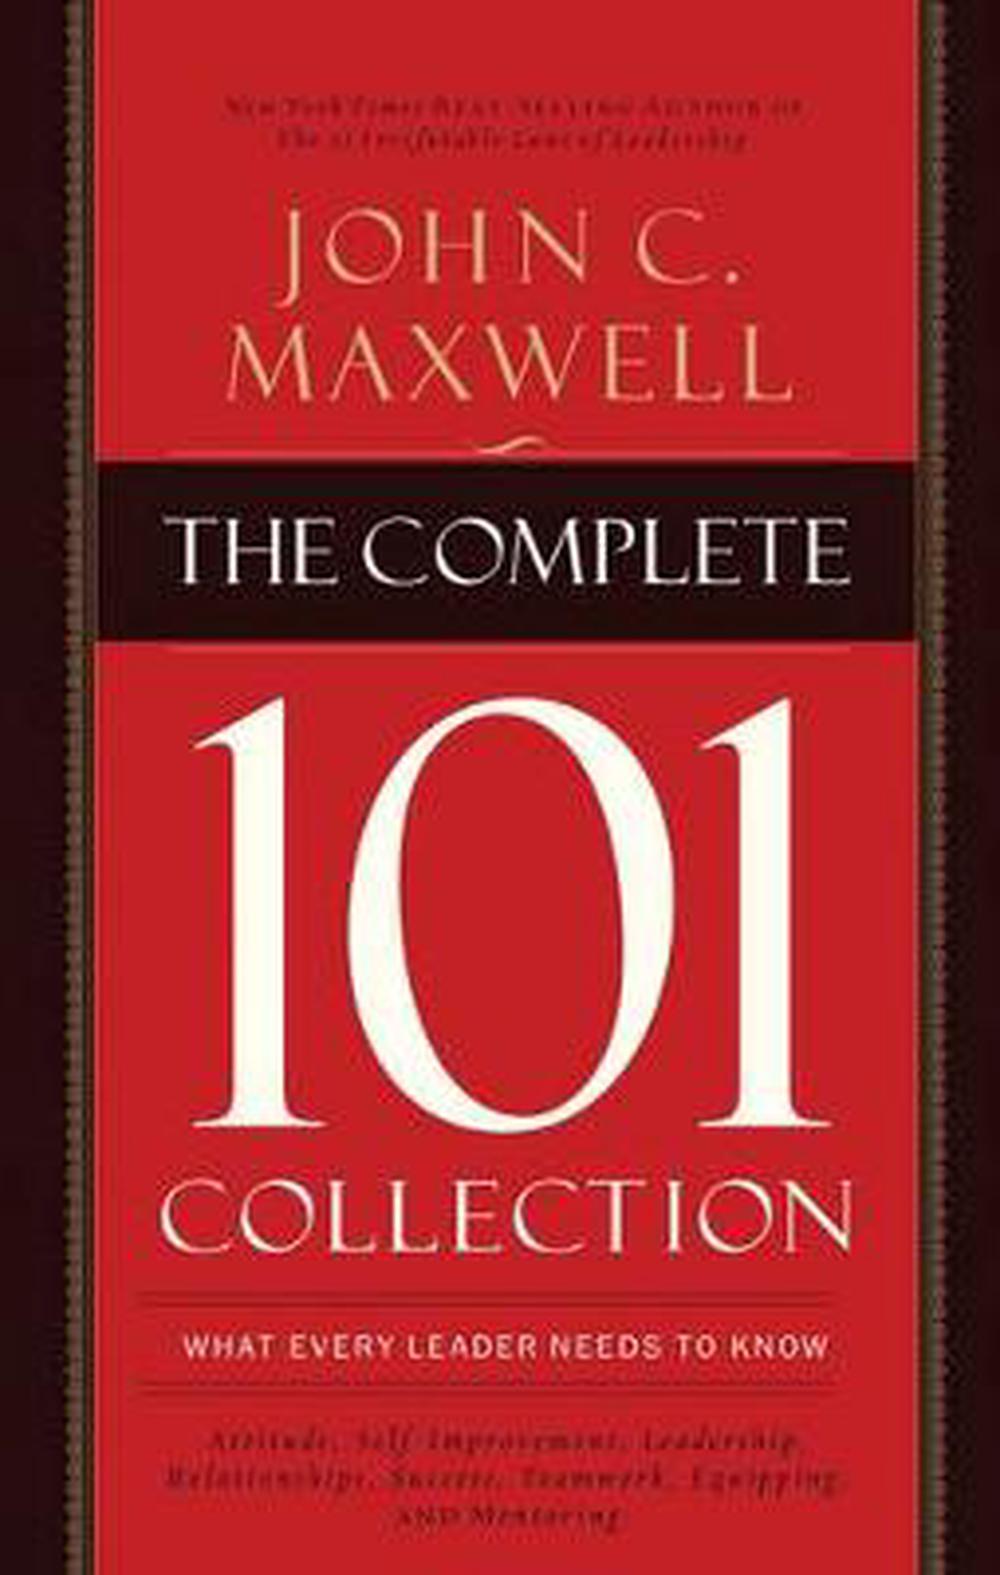 The Complete 101 Collection: What Every Leader Needs to Know by John C